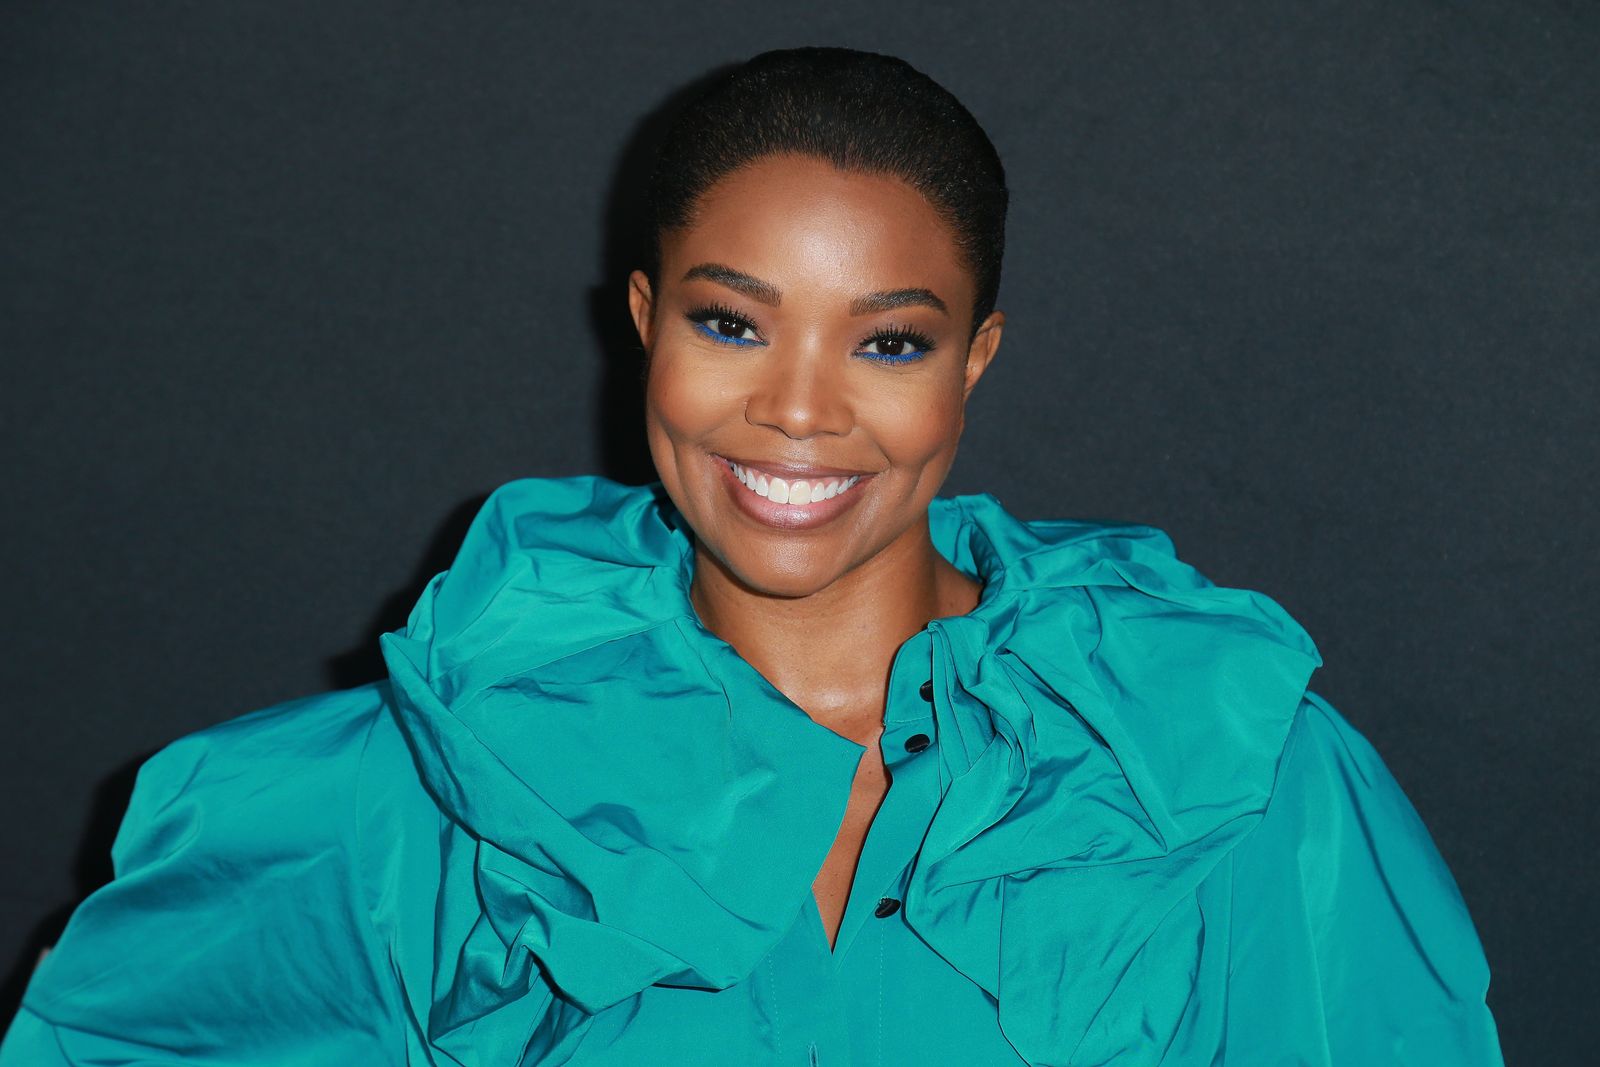 Gabrielle Union at Universal Pictures' special screening of "Breaking In" at ArcLight Cinemas on May 1, 2018 in Hollywood, California. | Source: Getty Images 